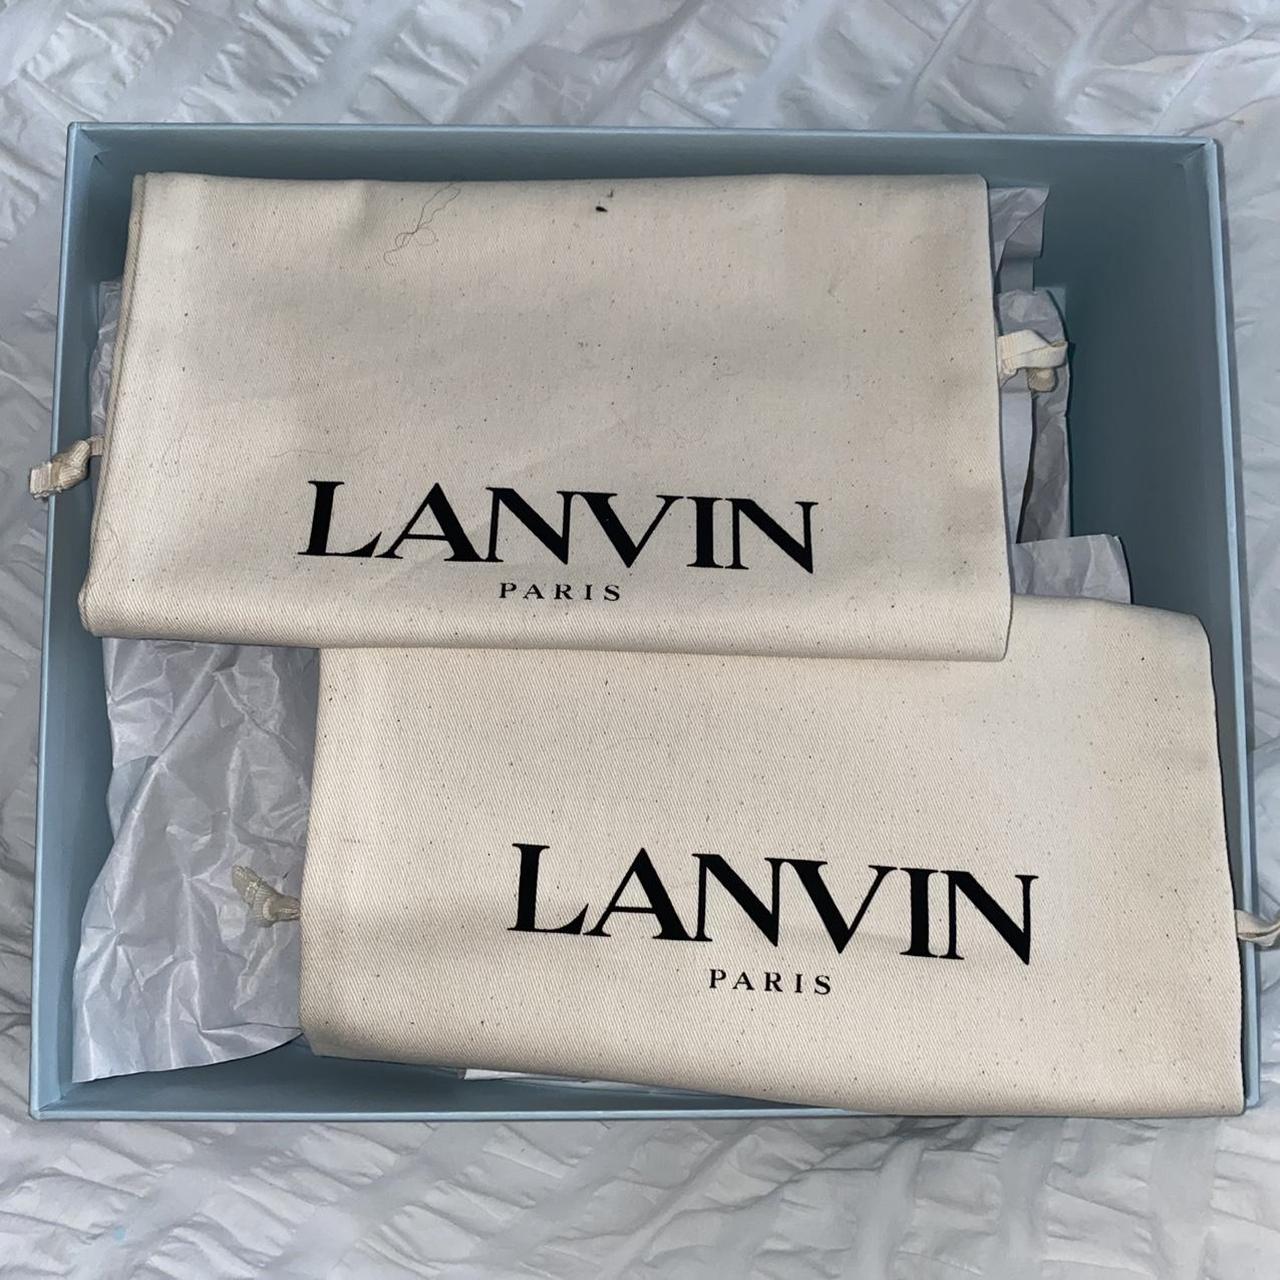 Lanvin Curb sneakers - UK size 7 worn twice for a... - Depop